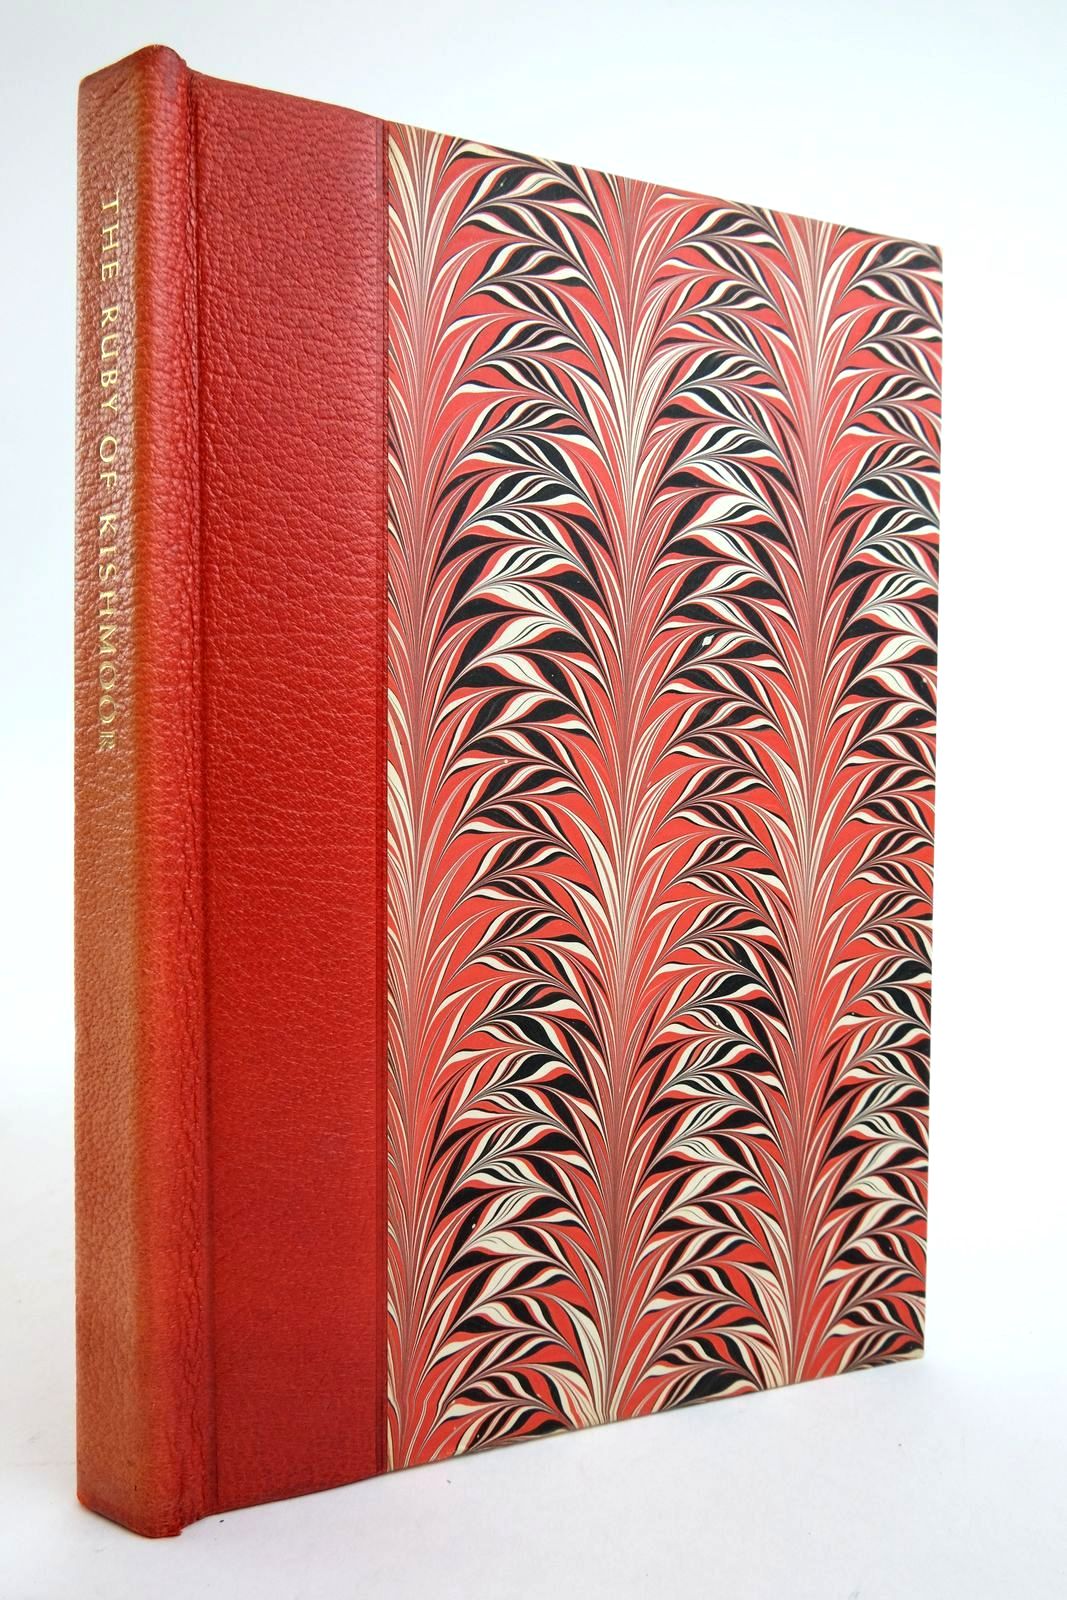 Photo of THE RUBY OF KISHMOOR written by Pyle, Howard illustrated by Pyle, Howard published by C.F. Braun & Co. (STOCK CODE: 2135904)  for sale by Stella & Rose's Books